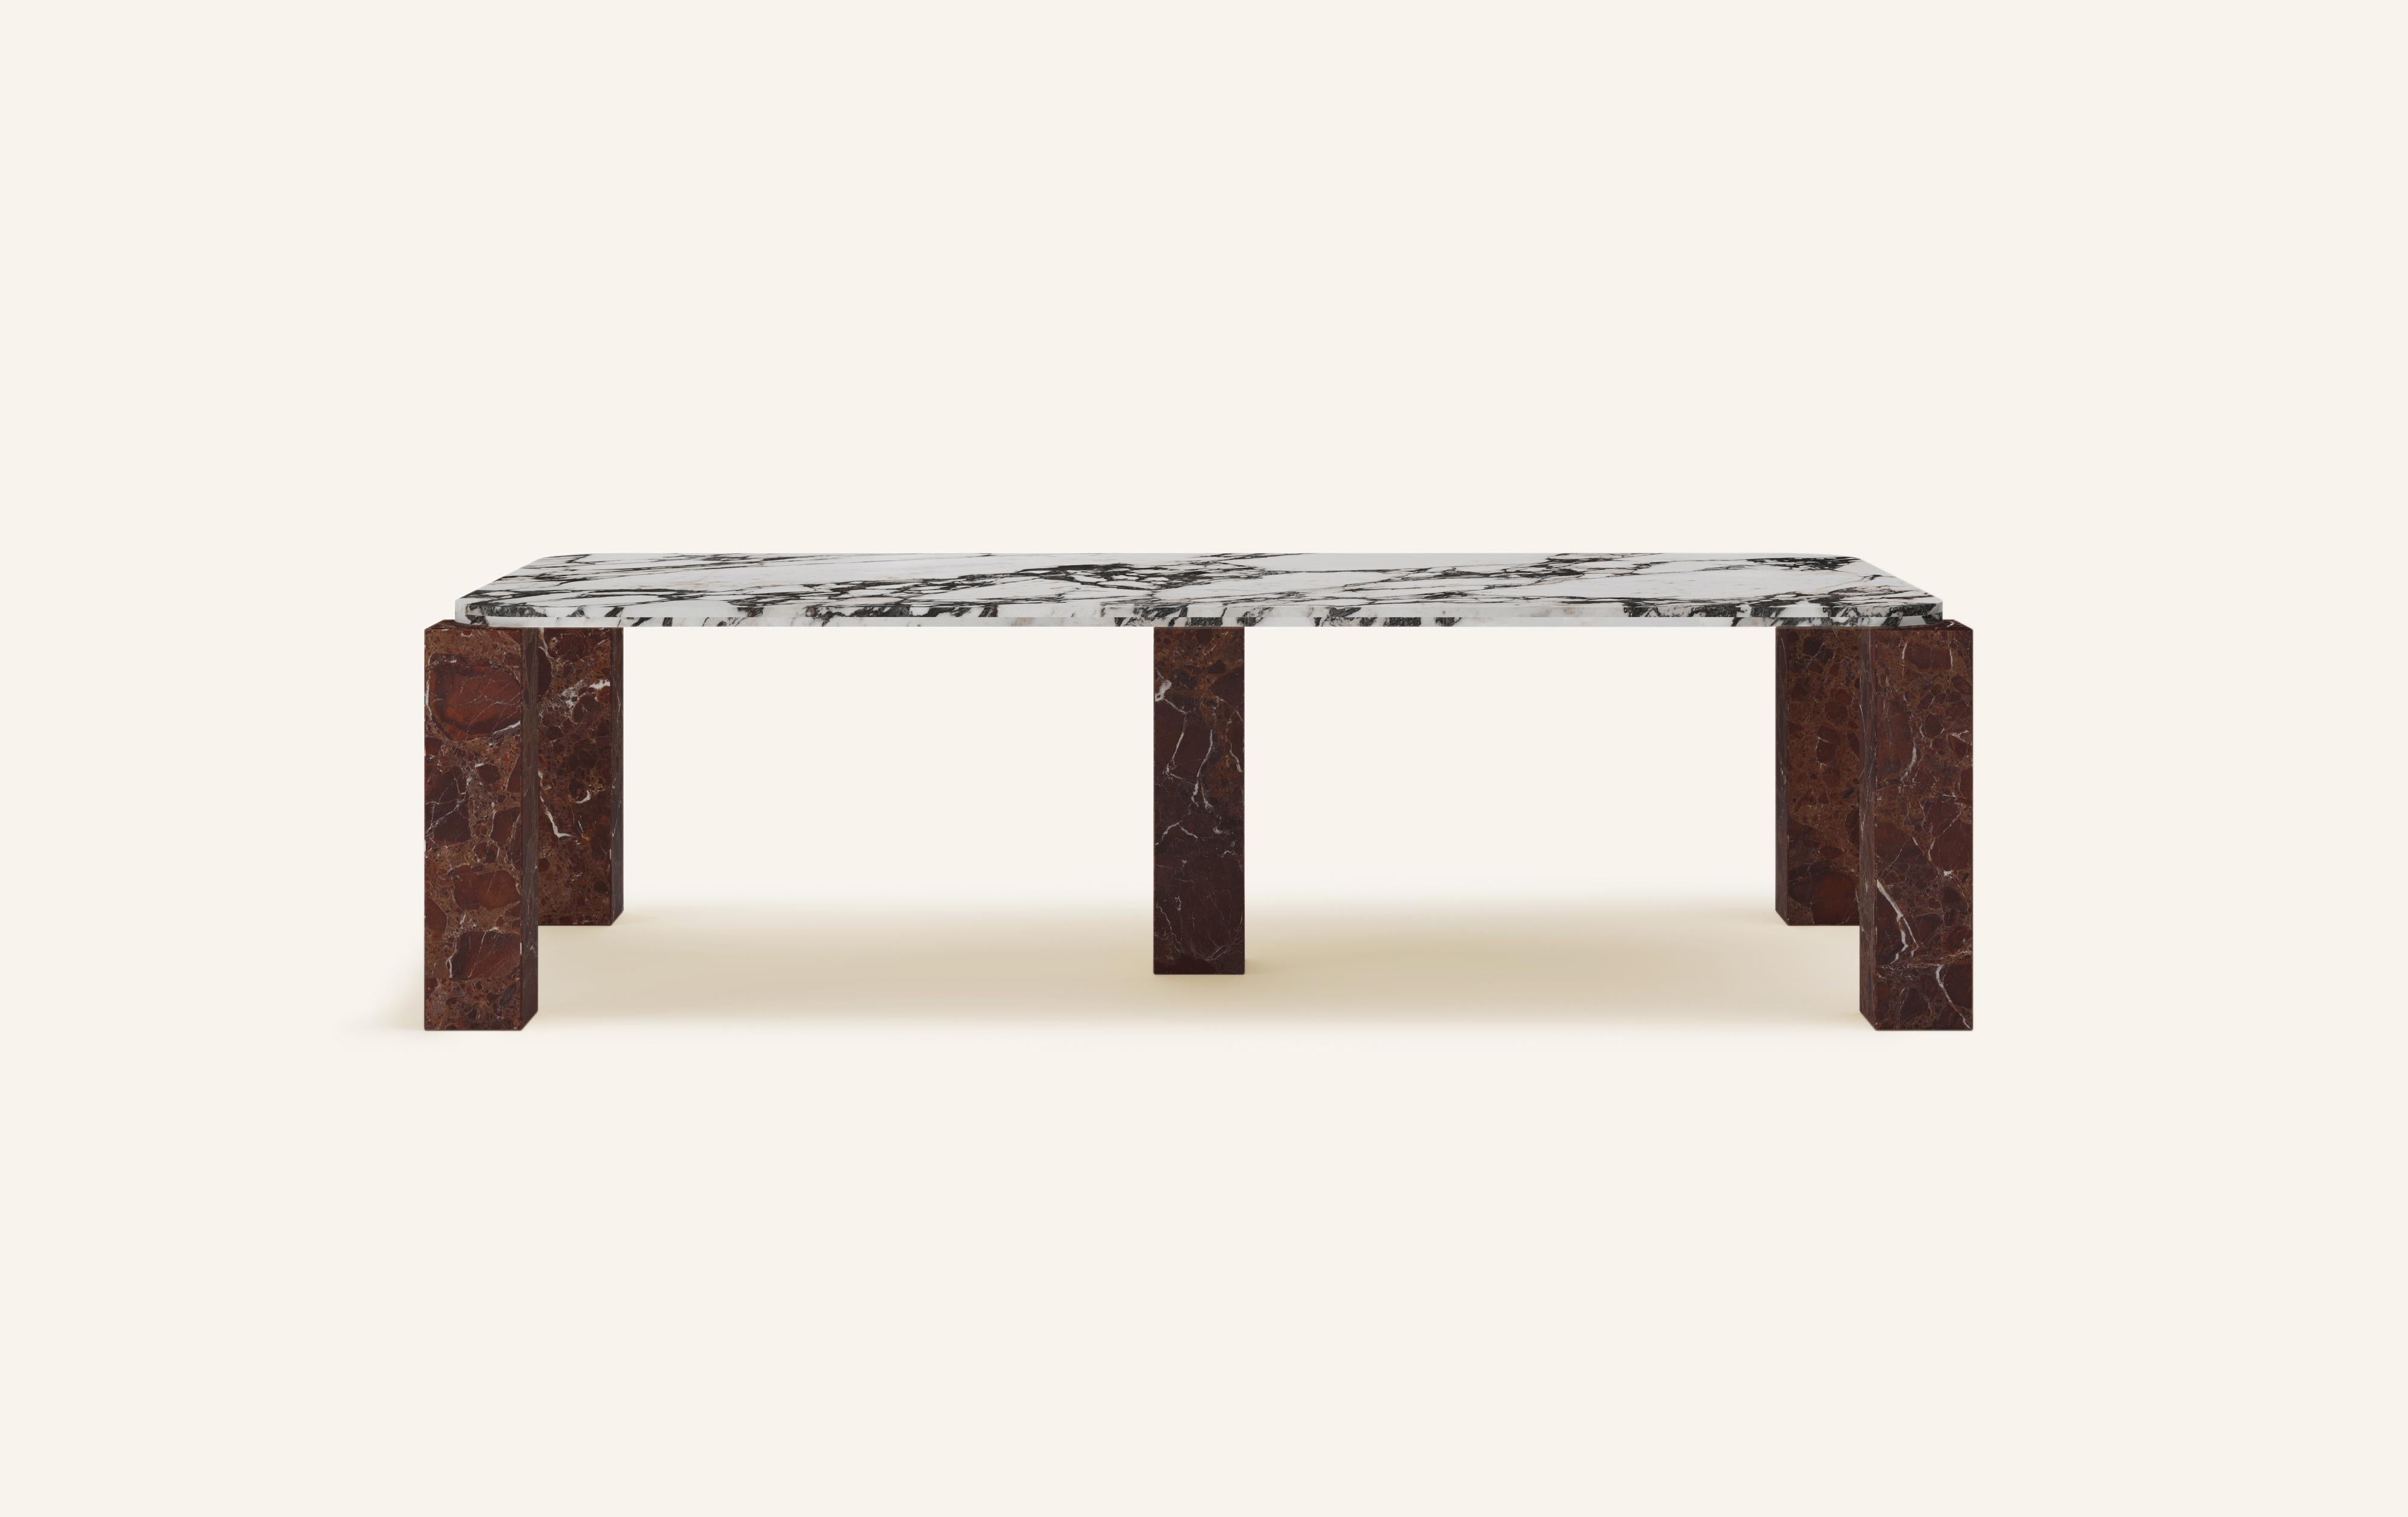 MONOLITHIC FORMS SOFTENED BY GENTLE EDGES. WITH ITS BOLD MARBLE PATTERNS CUBO IS AS VERSATILE AS IT IS STRIKING.

DIMENSIONS:
86”L x 44”W x 30”H: 
- 84”L x 42”W x 1.5” THICK TABLETOP WITH WITH 6